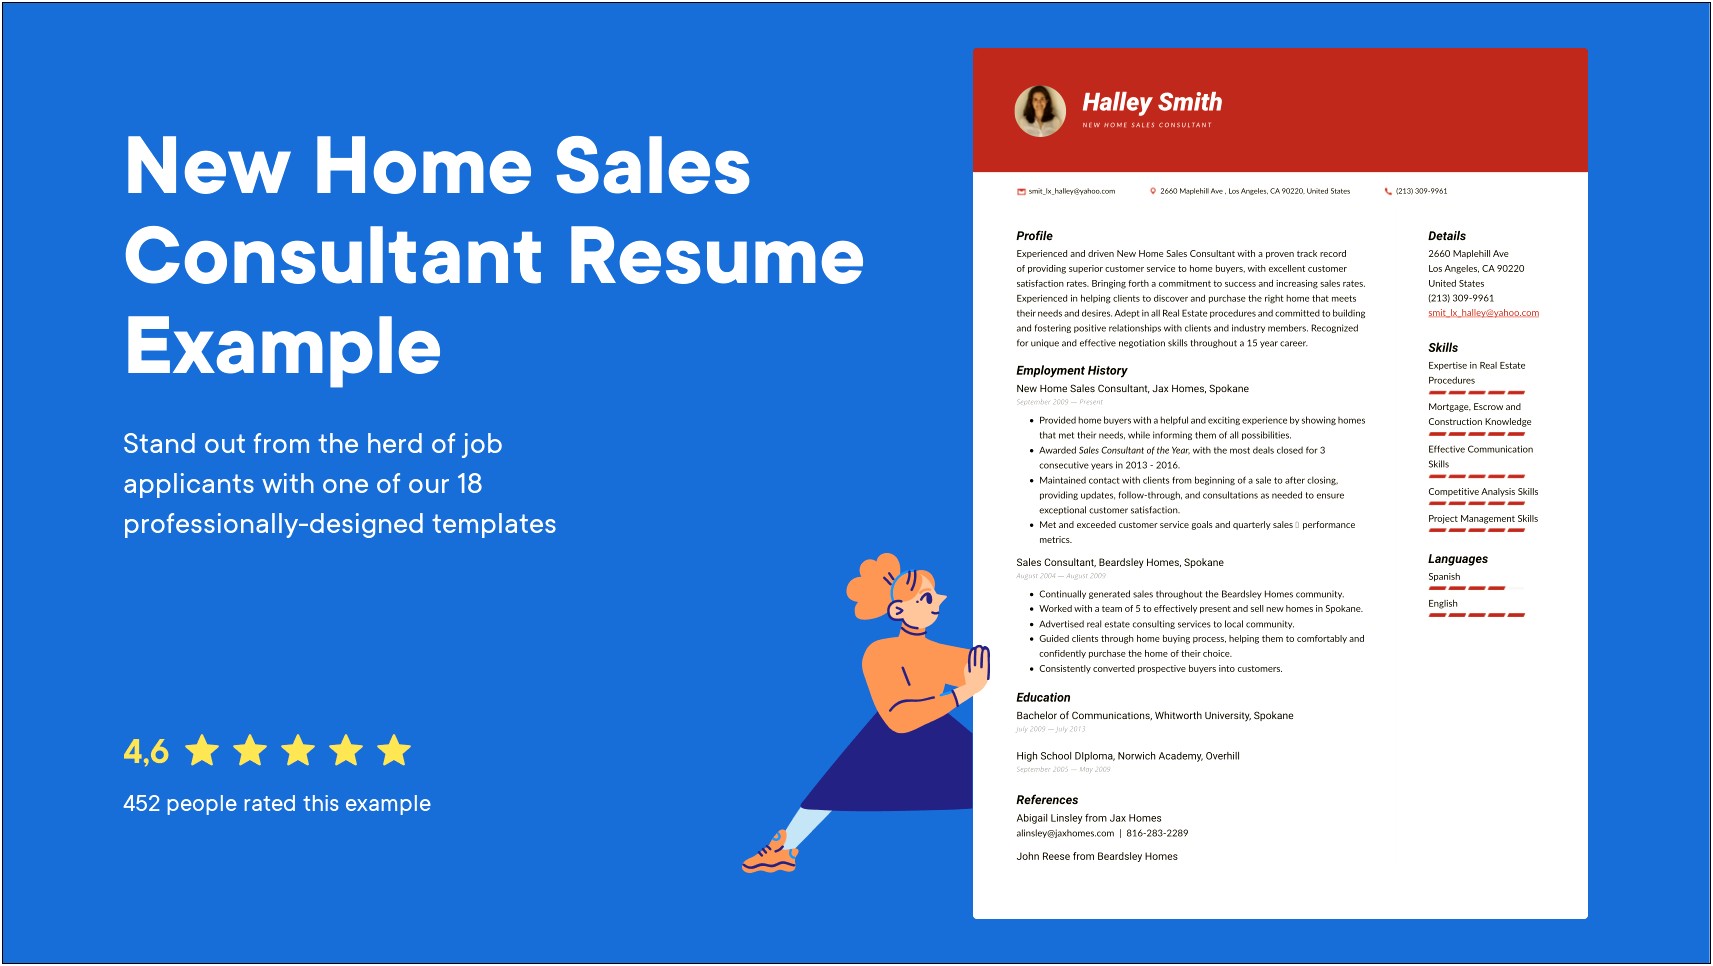 Resume Objective For New Home Sales